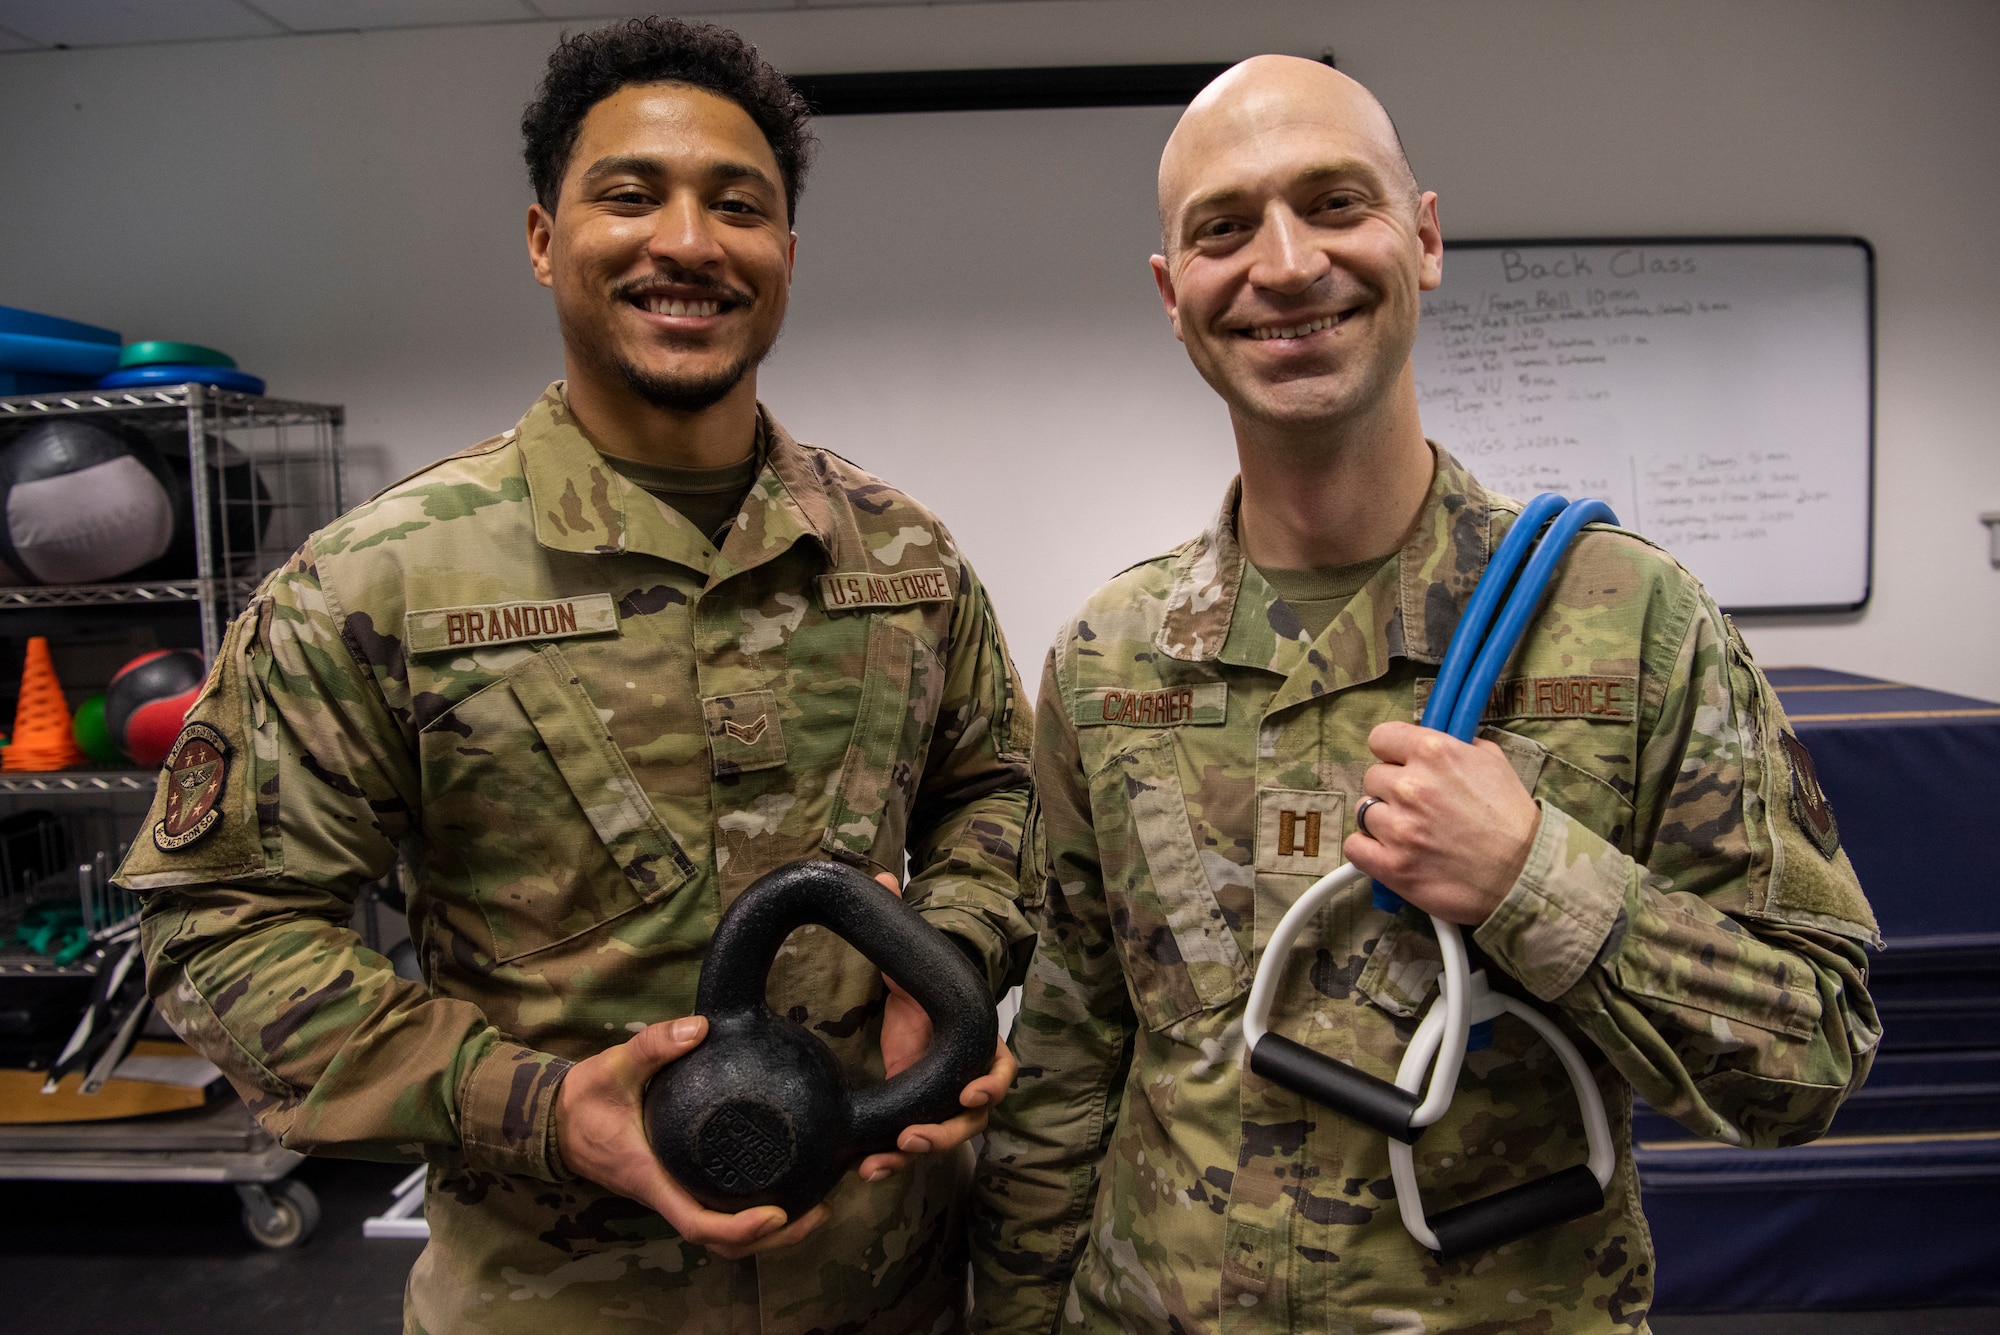 Airmen stand together holding exercise equipment